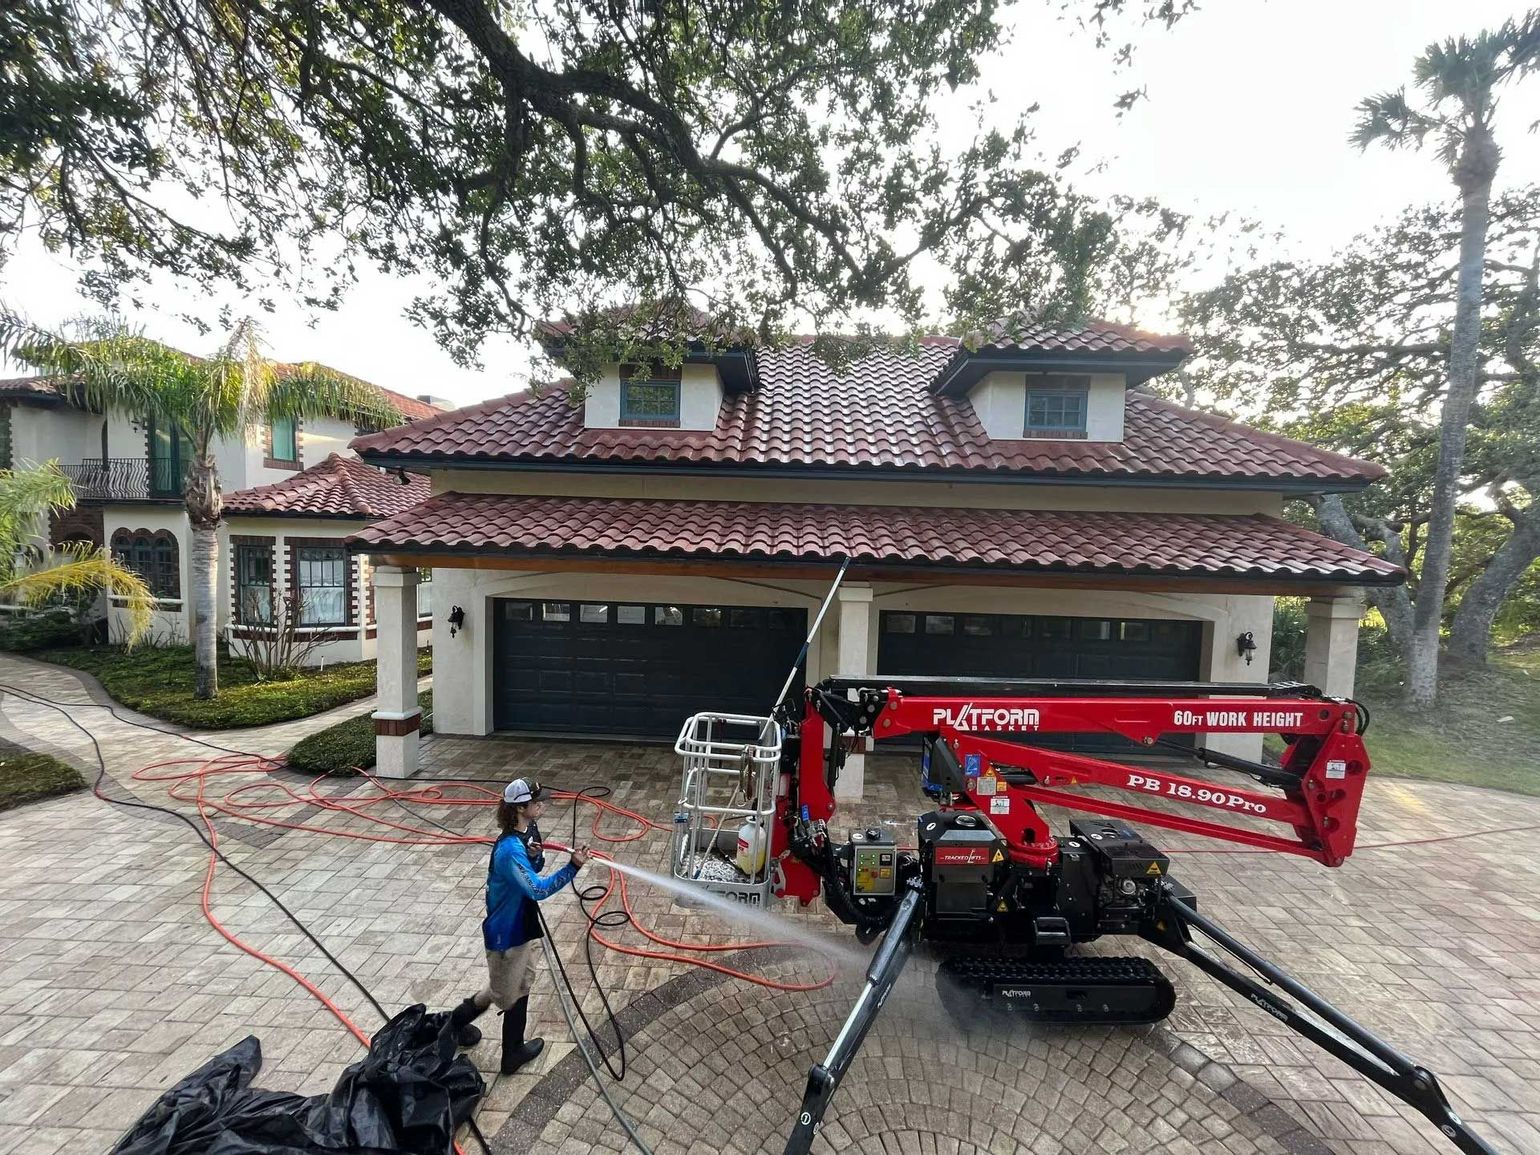 A Man is Cleaning the Roof of a House with a Platform Lift